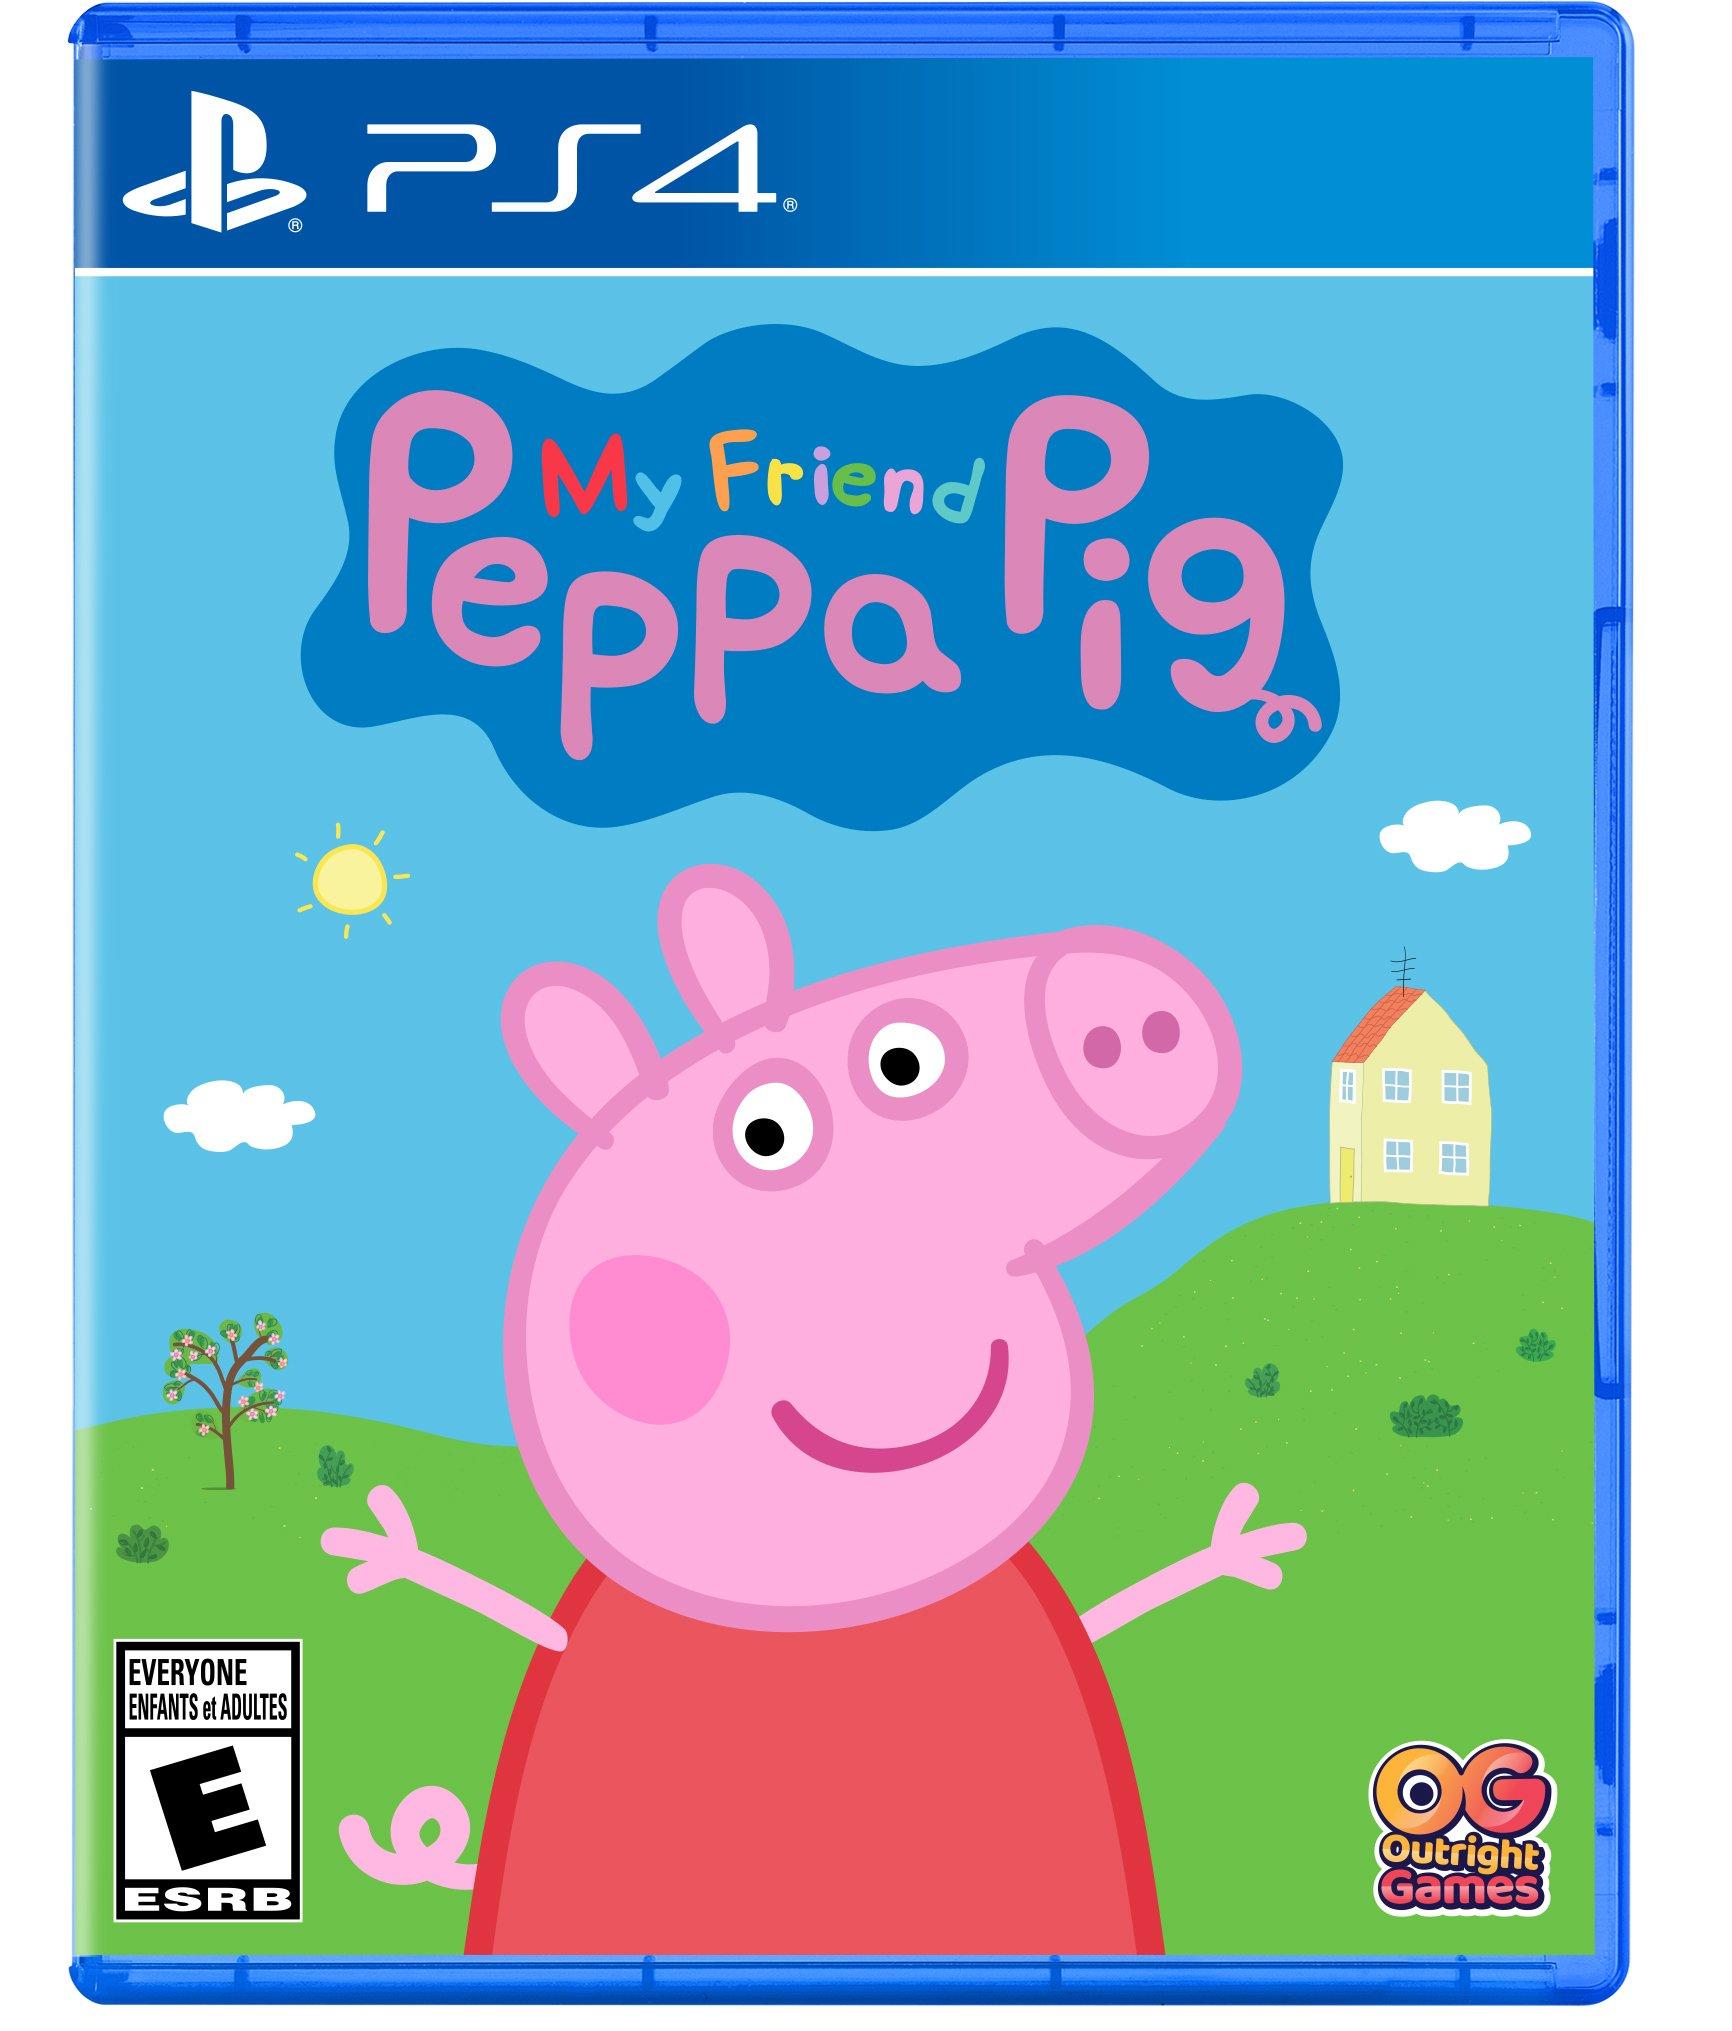 My Friend Peppa Pig - PlayStation 4 | Outright Games | GameStop